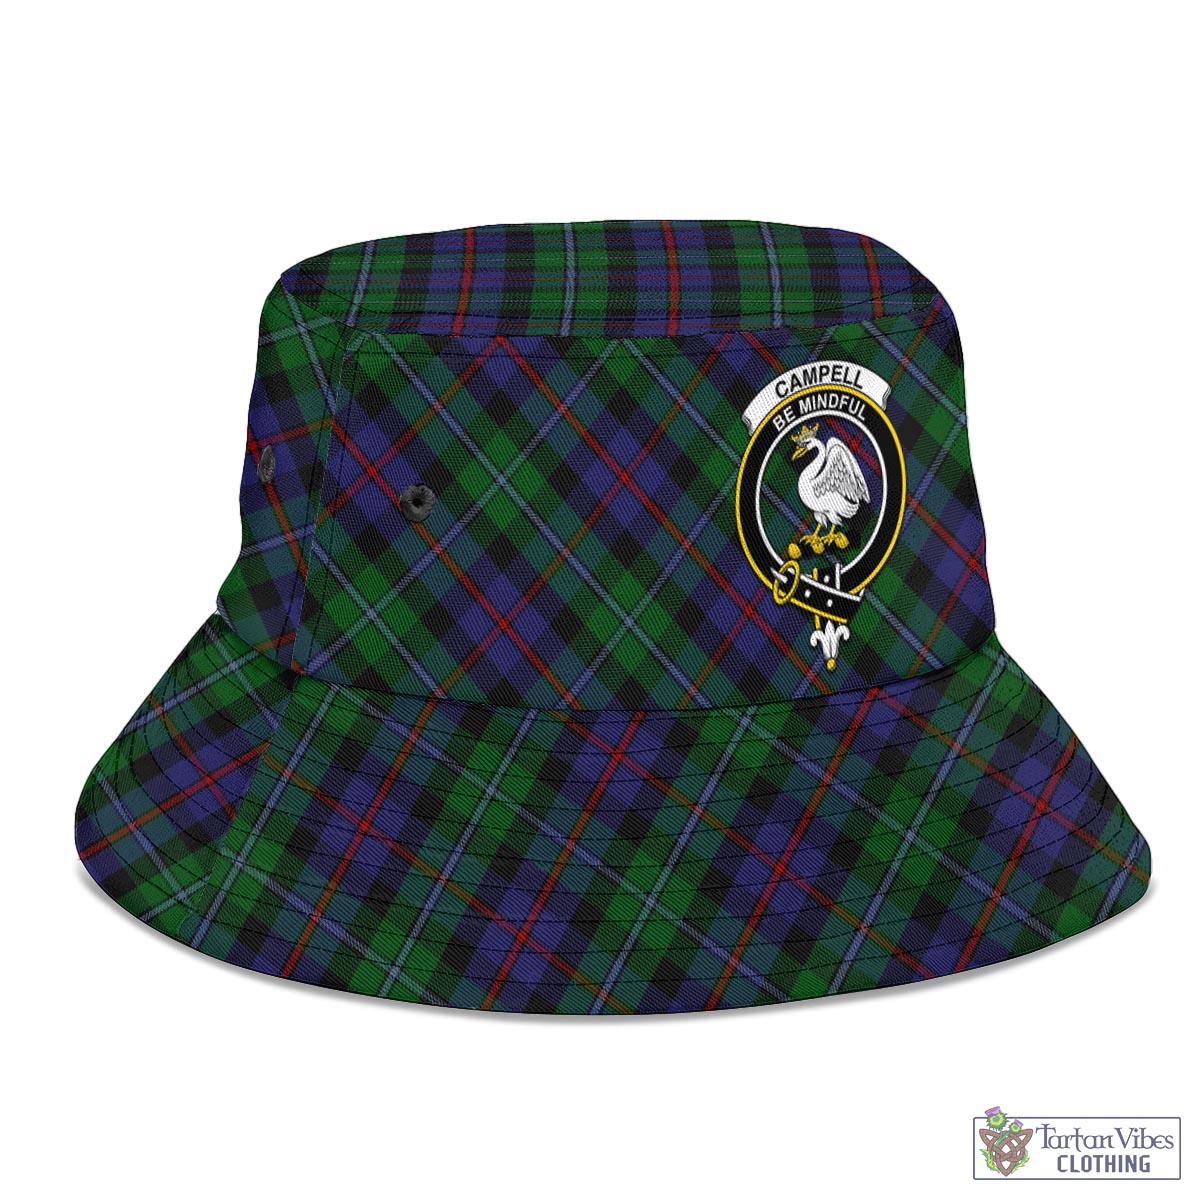 Tartan Vibes Clothing Campbell of Cawdor Tartan Bucket Hat with Family Crest